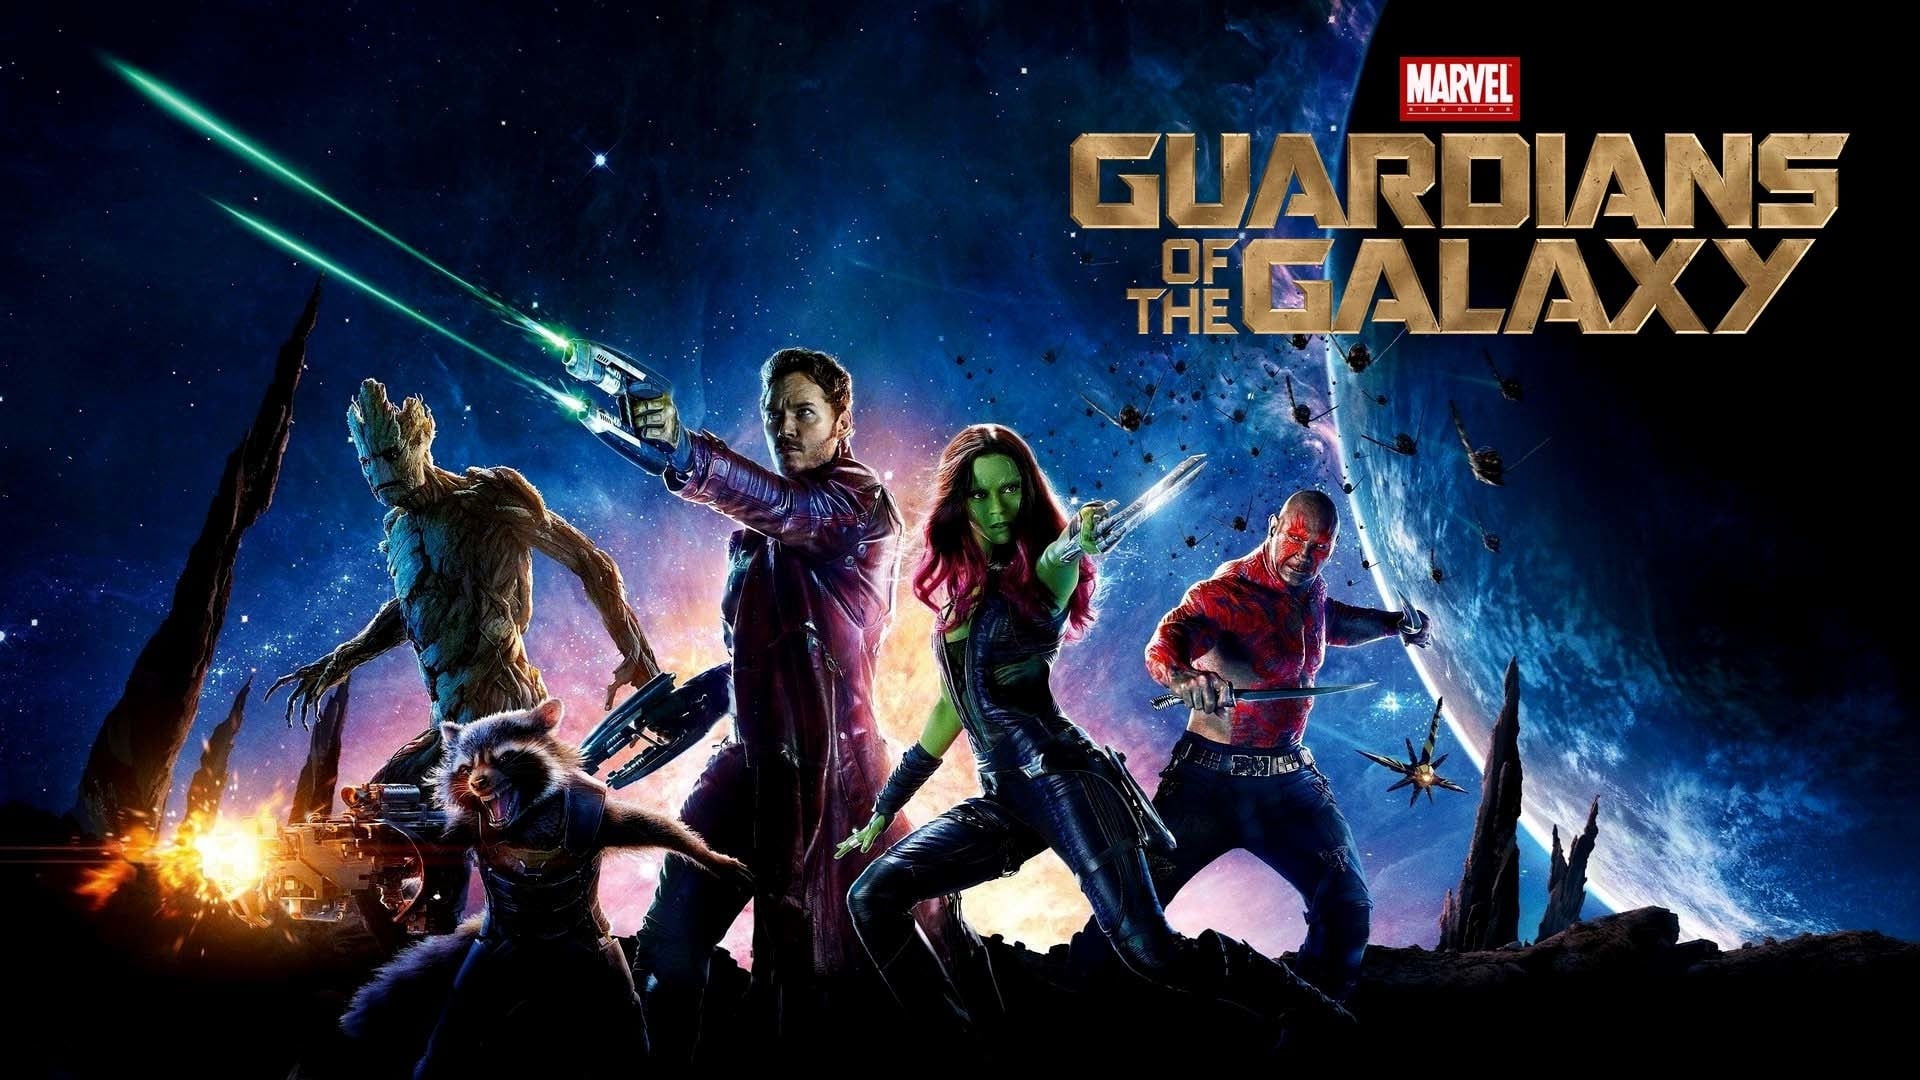 guardians of the galaxy full movie 2014 free